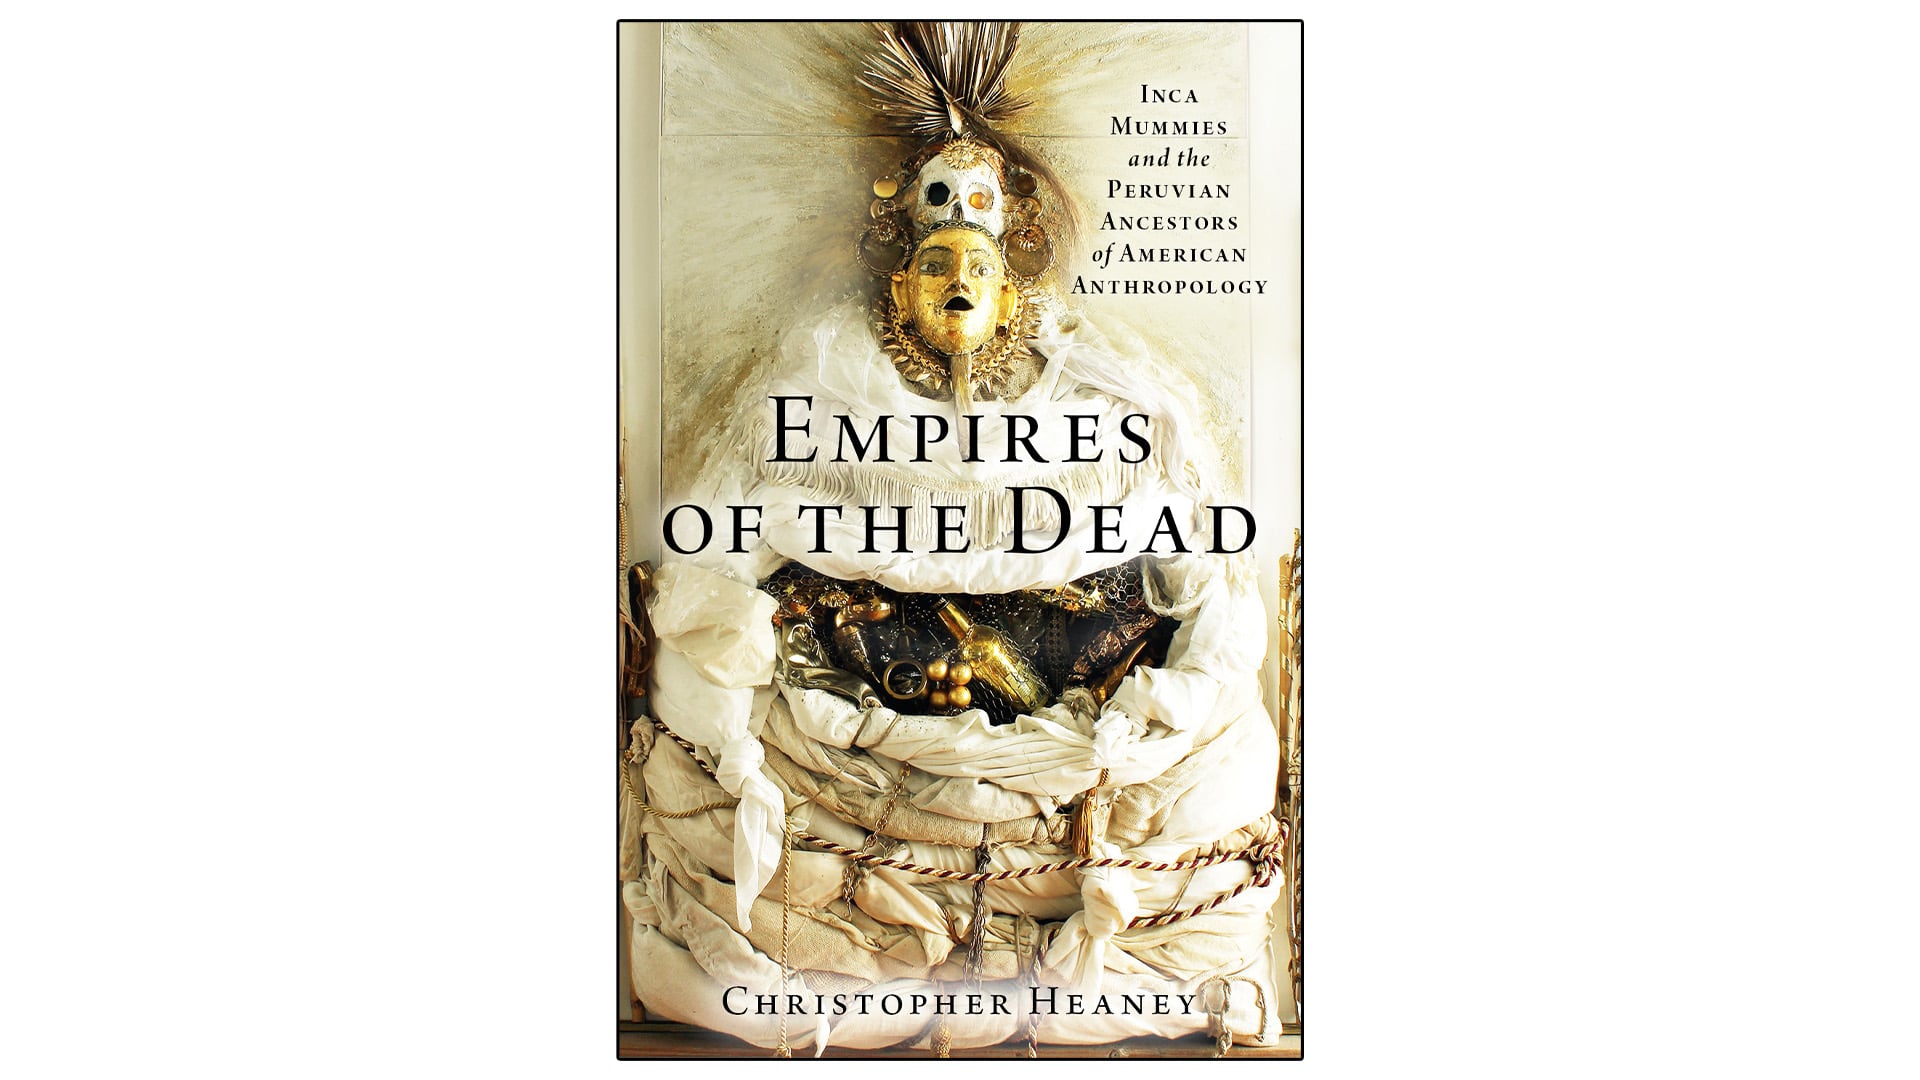 'Empires of the Dead' by Christopher Heaney (Oxford University Press, 2023).